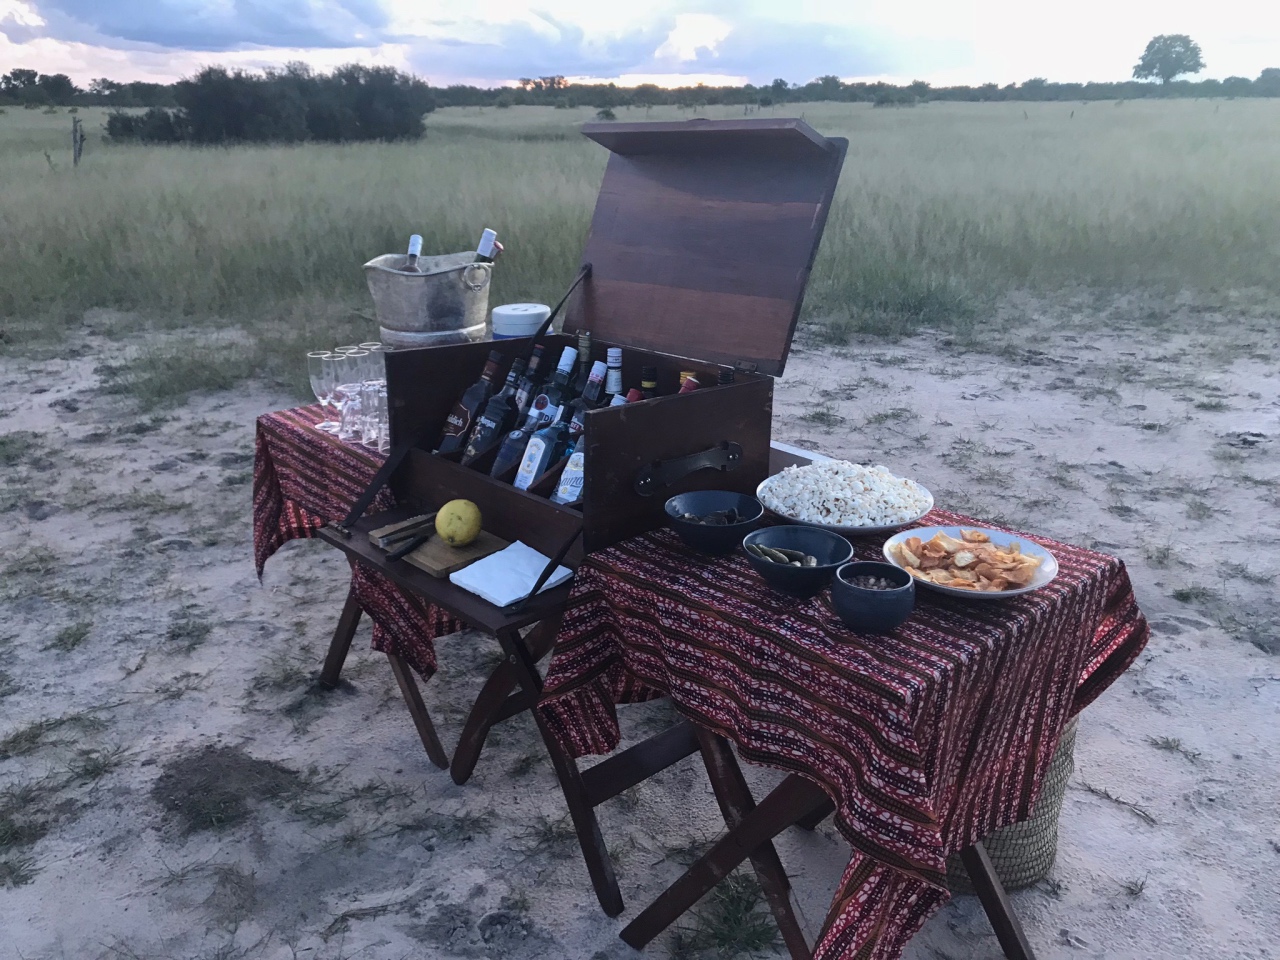 Game drive sundowners done in style at Somalisa Camp